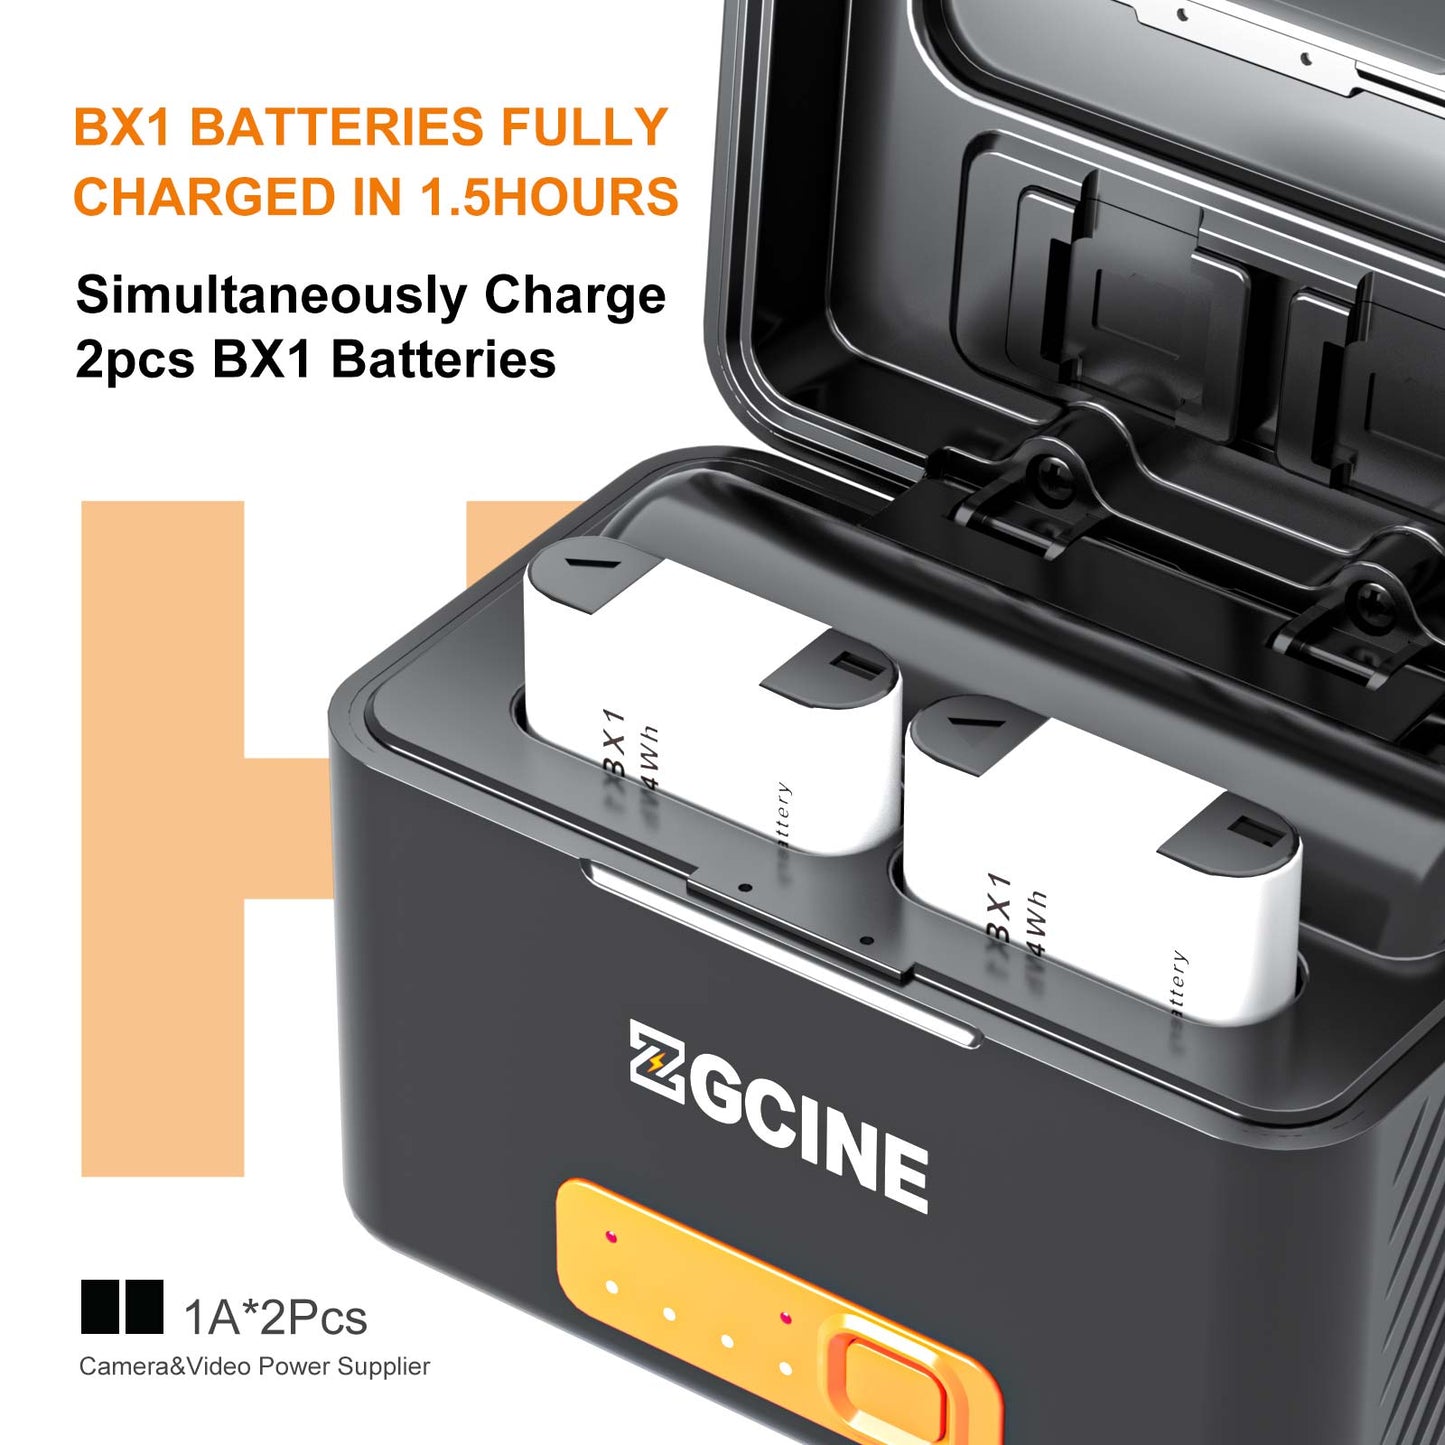 ZGCINE Charging Case for Sony NP-BX1 battery with 2 Charging Slots